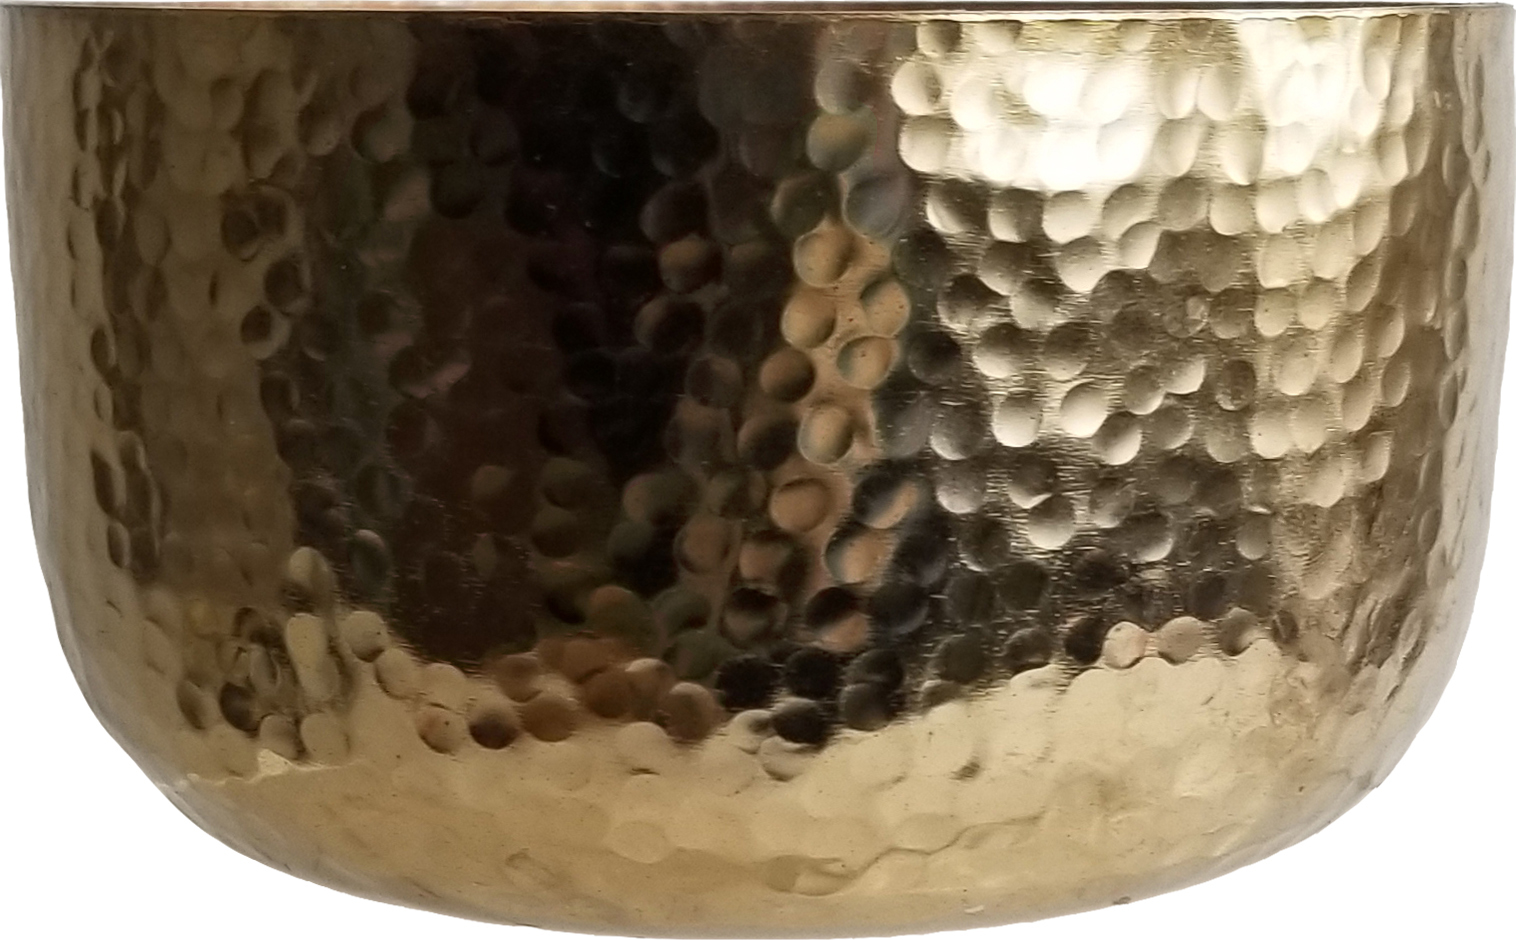 Better Homes & Gardens Gold Hammered Metal Bowl 3-Wick Soft Cashmere Amber Candle - image 2 of 3